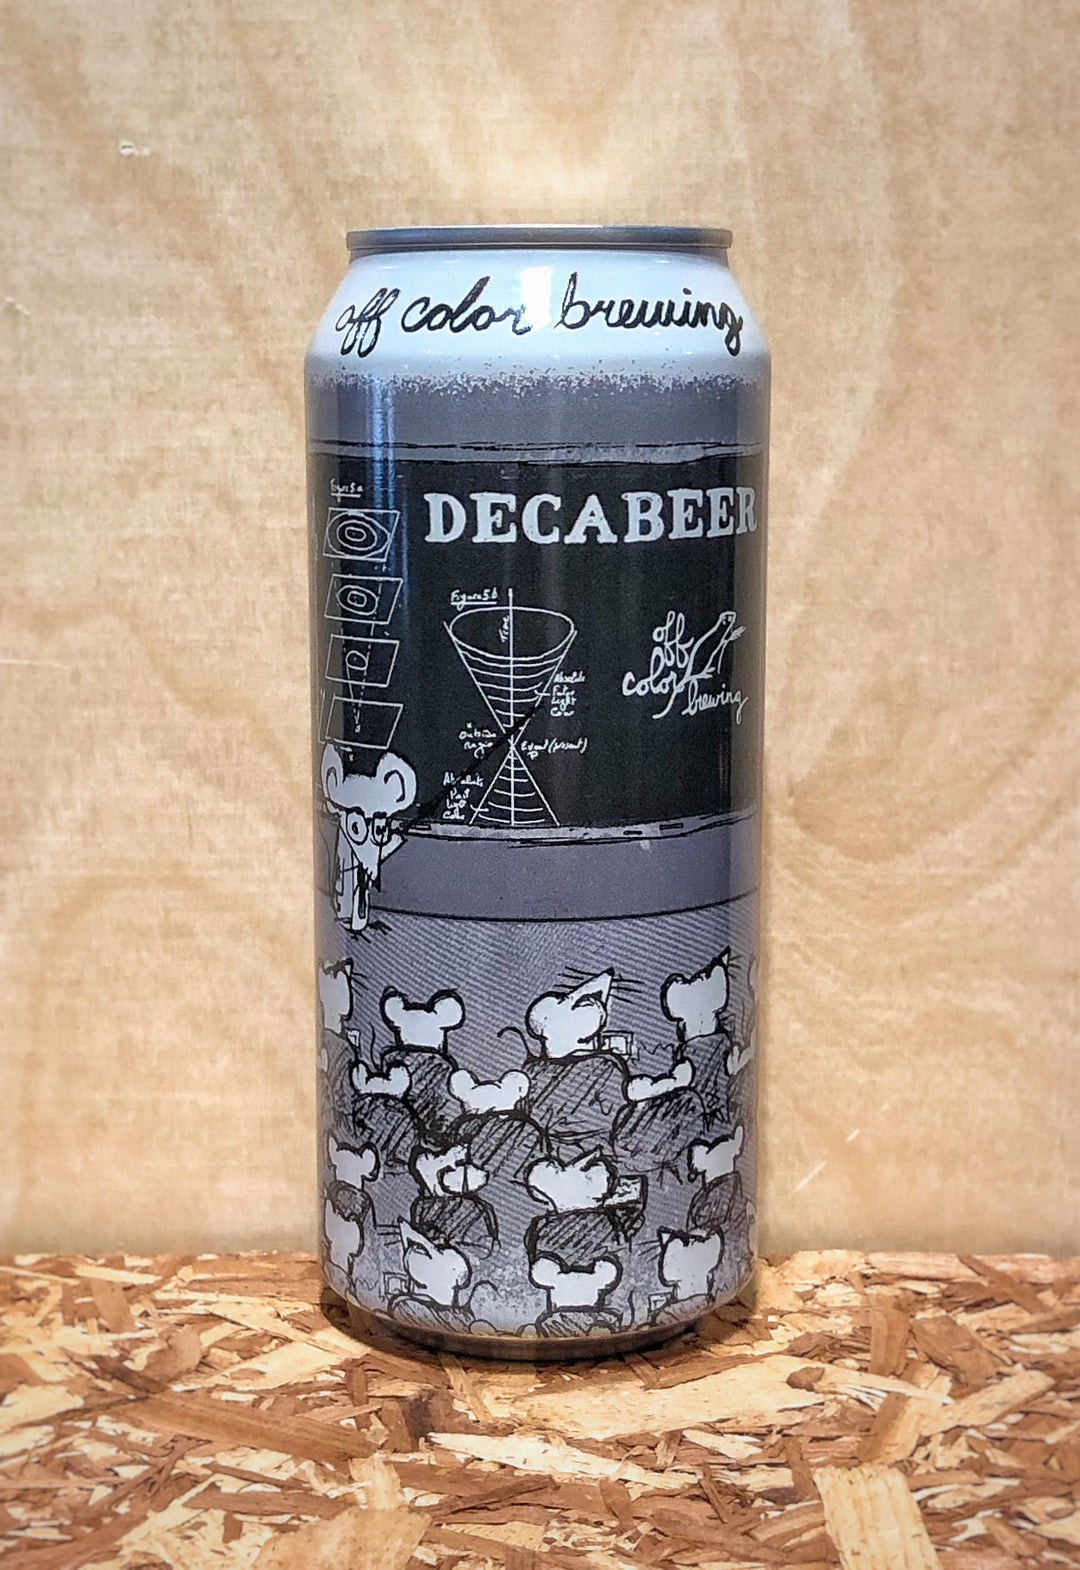 Off Color Brewing 'DecaBeer' Farmhouse Ale Mix Fermented with Two Classic Farmhouse Yeast Strains (Chicago, IL)